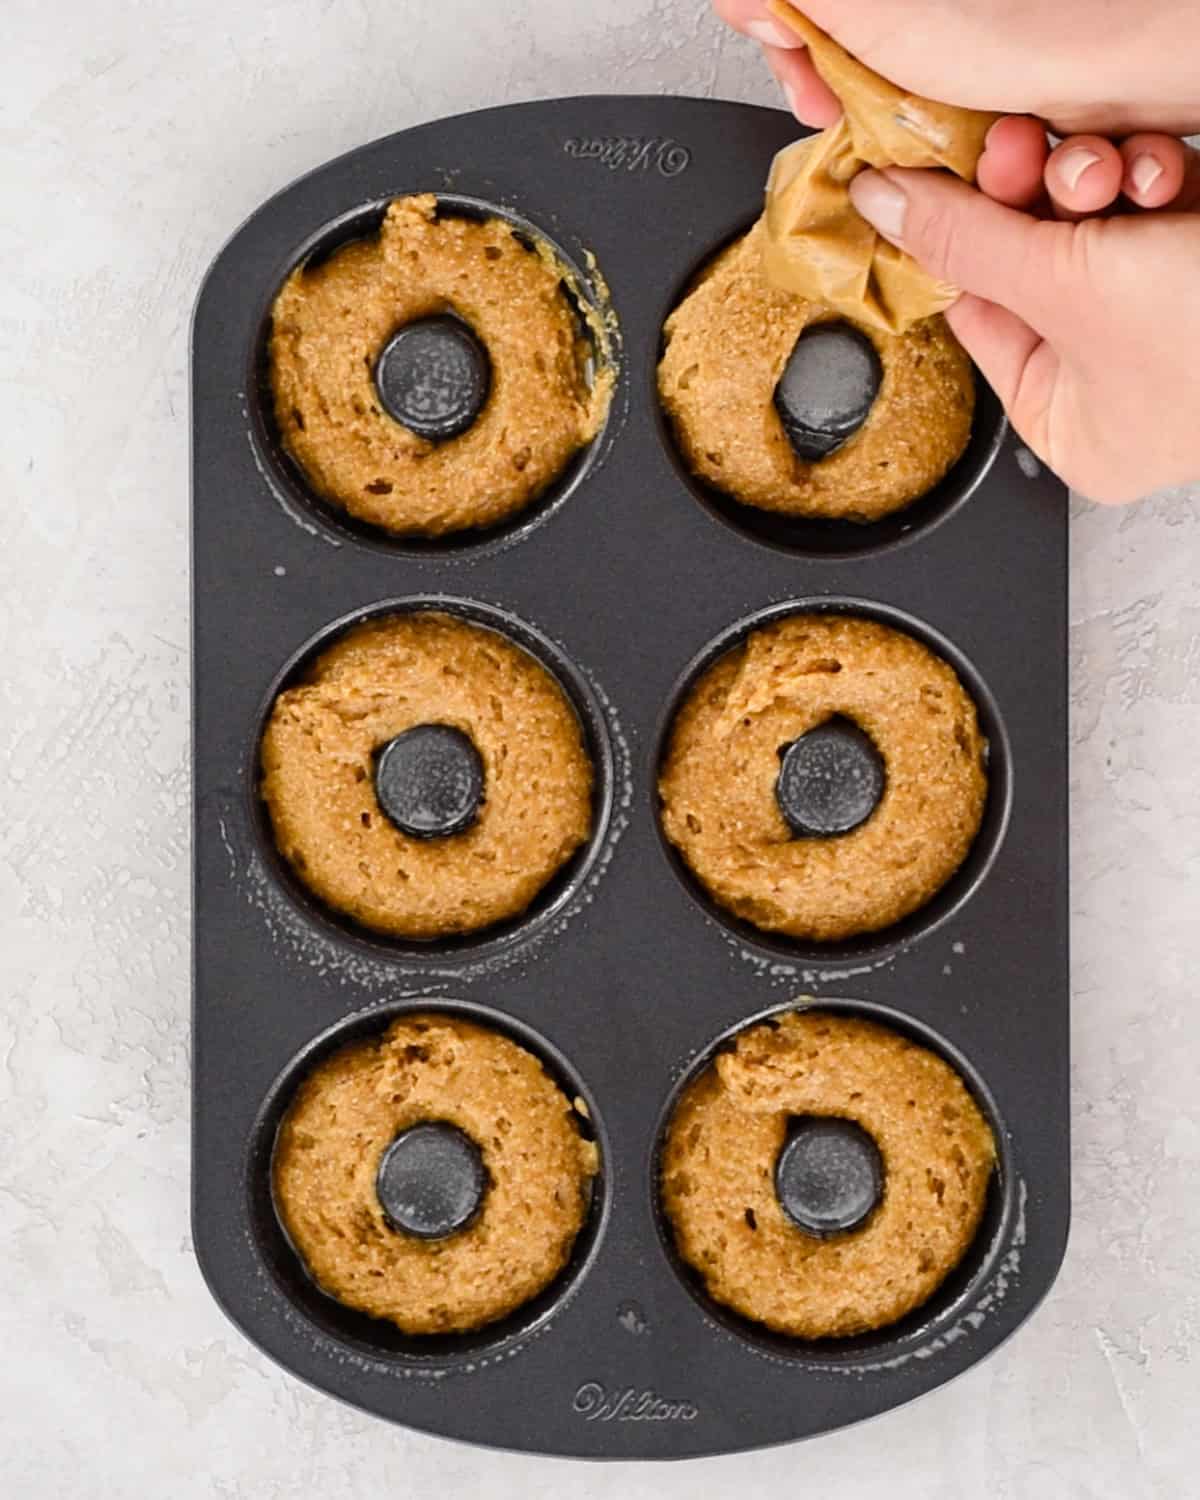 Baked Pumpkin Donuts batter being piped into the wells of a donut pan